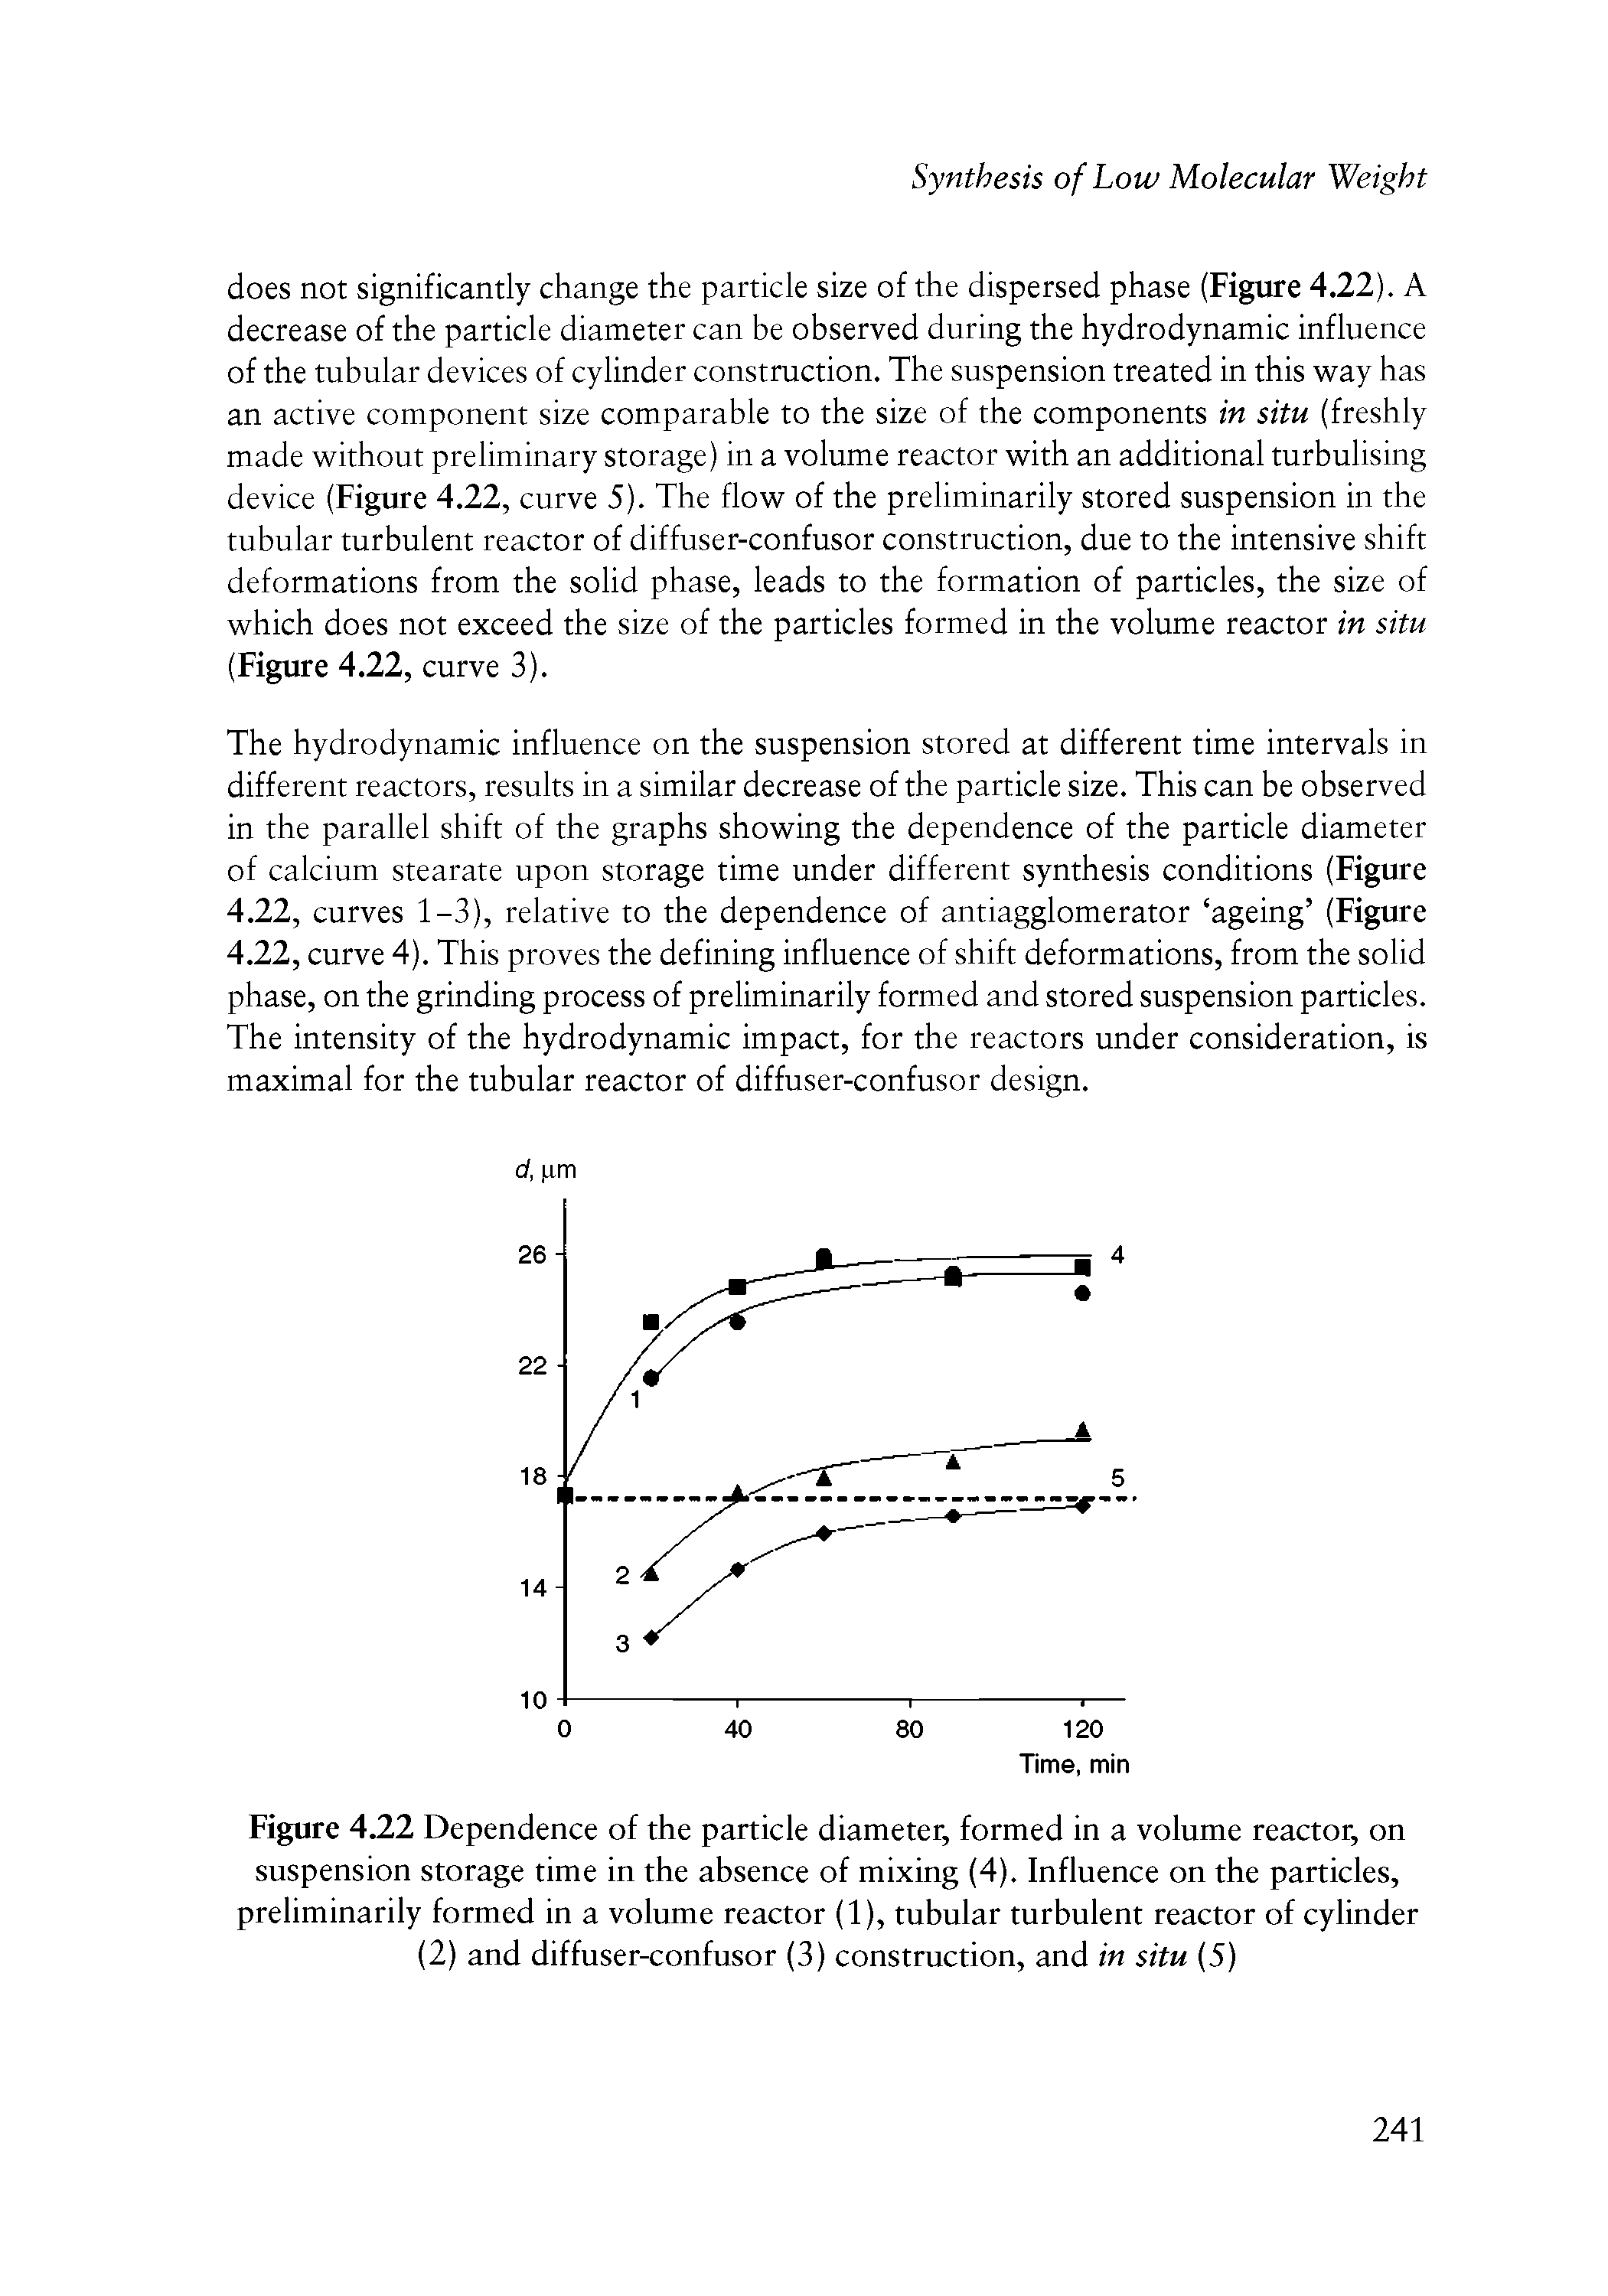 Figure 4.22 Dependence of the particle diameter, formed in a volume reactor, on suspension storage time in the absence of mixing (4). Influence on the particles, preliminarily formed in a volume reactor (1), tubular turbulent reactor of cylinder (2) and diffuser-confusor (3) construction, and in situ (5)...